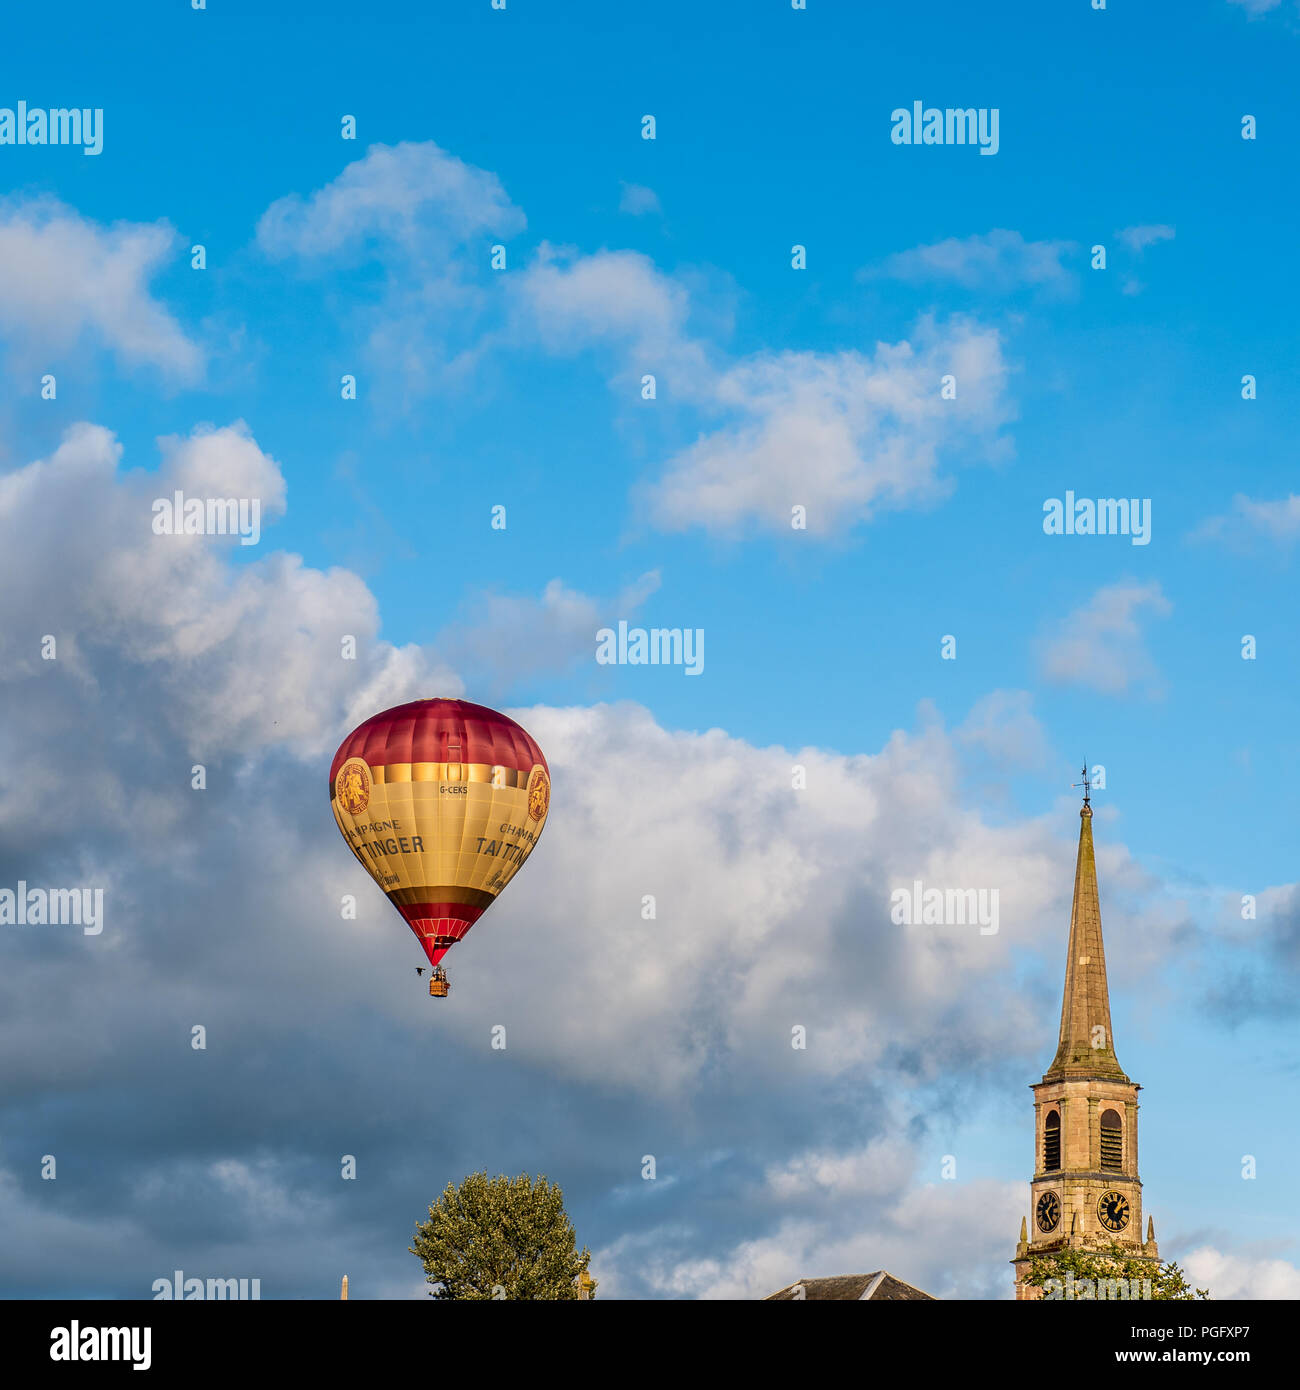 Strathaven, Scotland, 25th Aug, 2018. The international Balloon Festival is a display of hot air ballooning held in the John Hastie Park in Strathaven, Scotland. Credit George Robertson/Alamy Live News Stock Photo